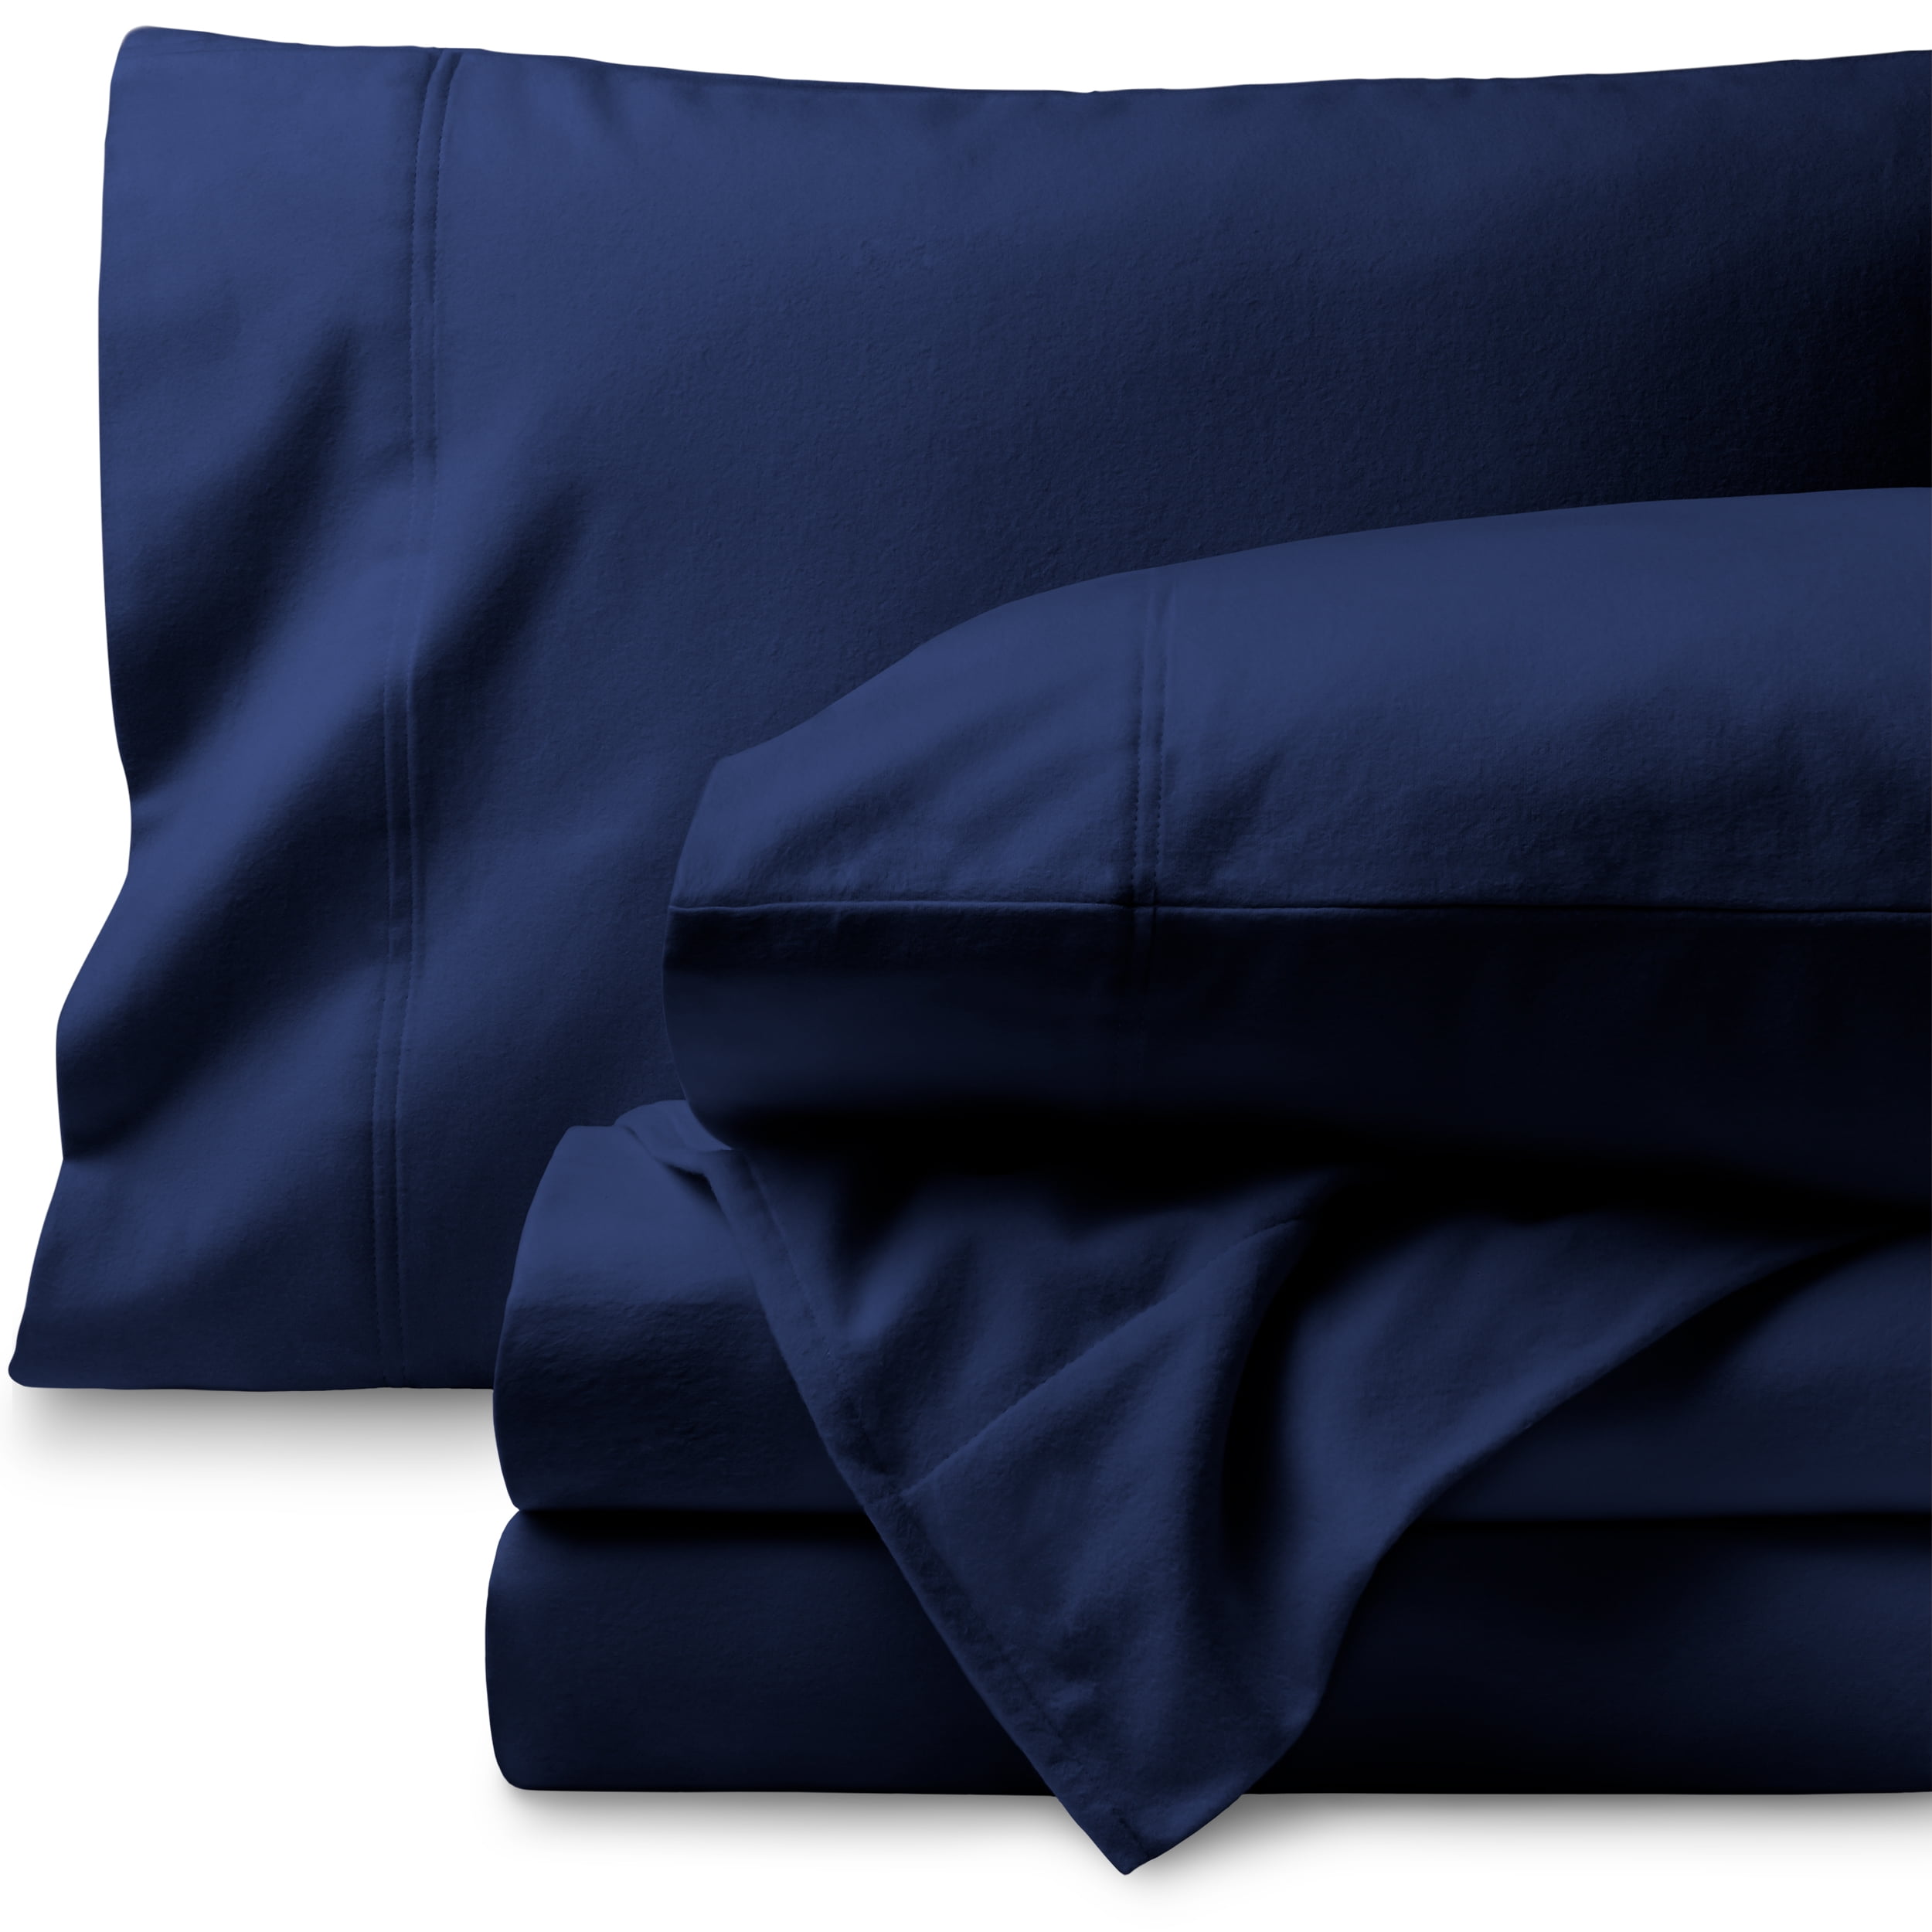 Heavyweight 100% Cotton King Size Deep Pocket Flannel Sheets 